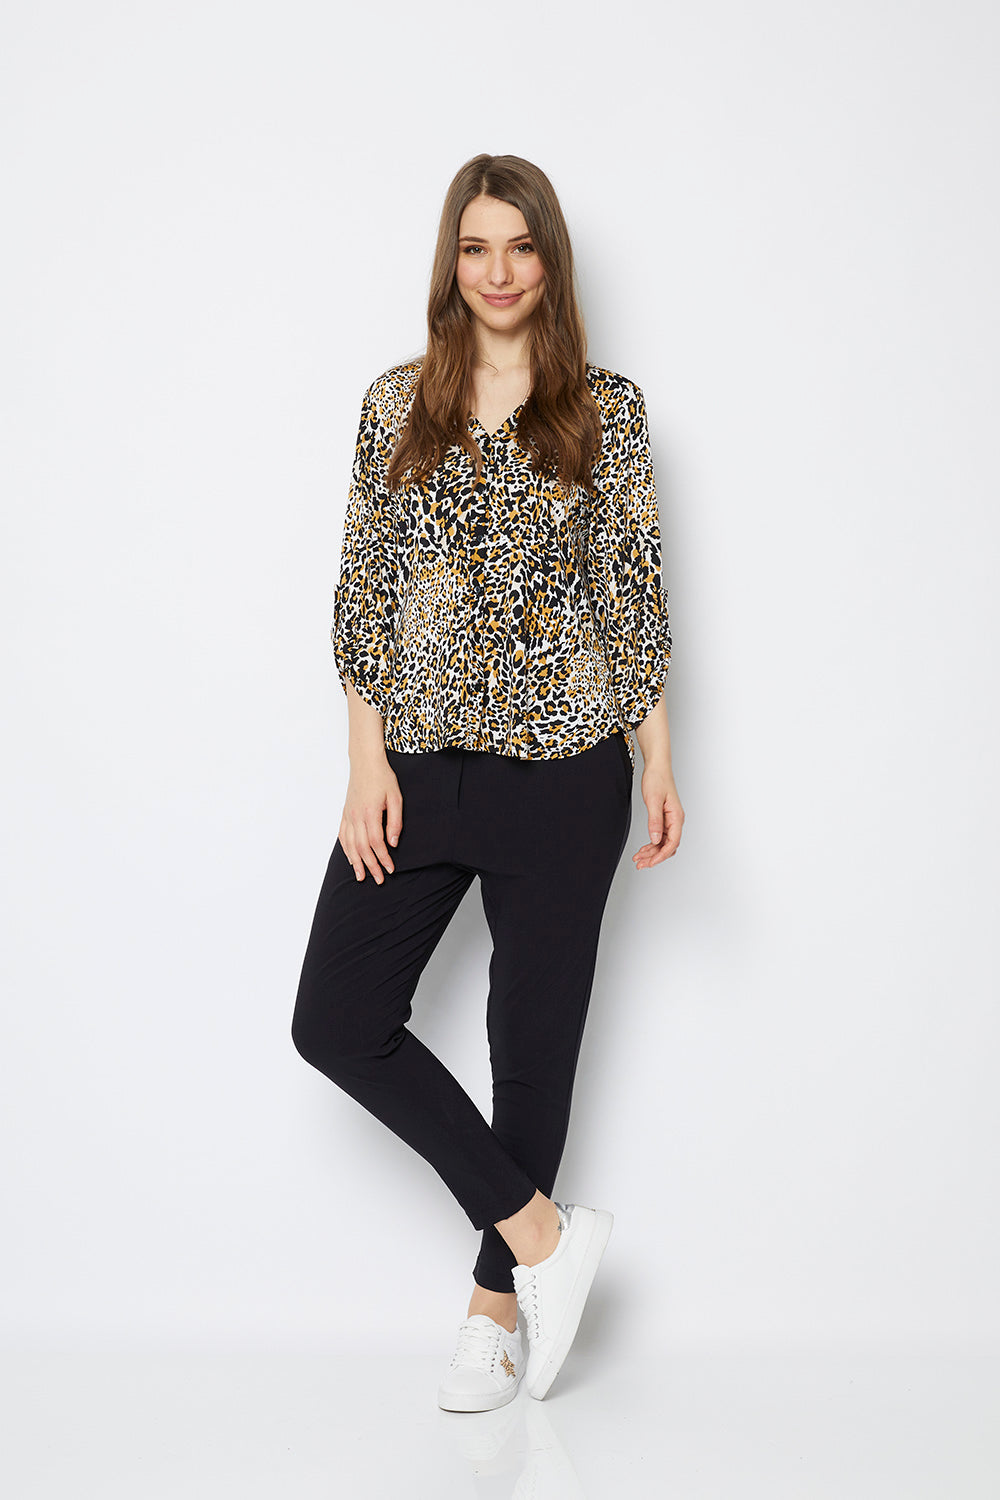 Philosophy Fisher Blouse